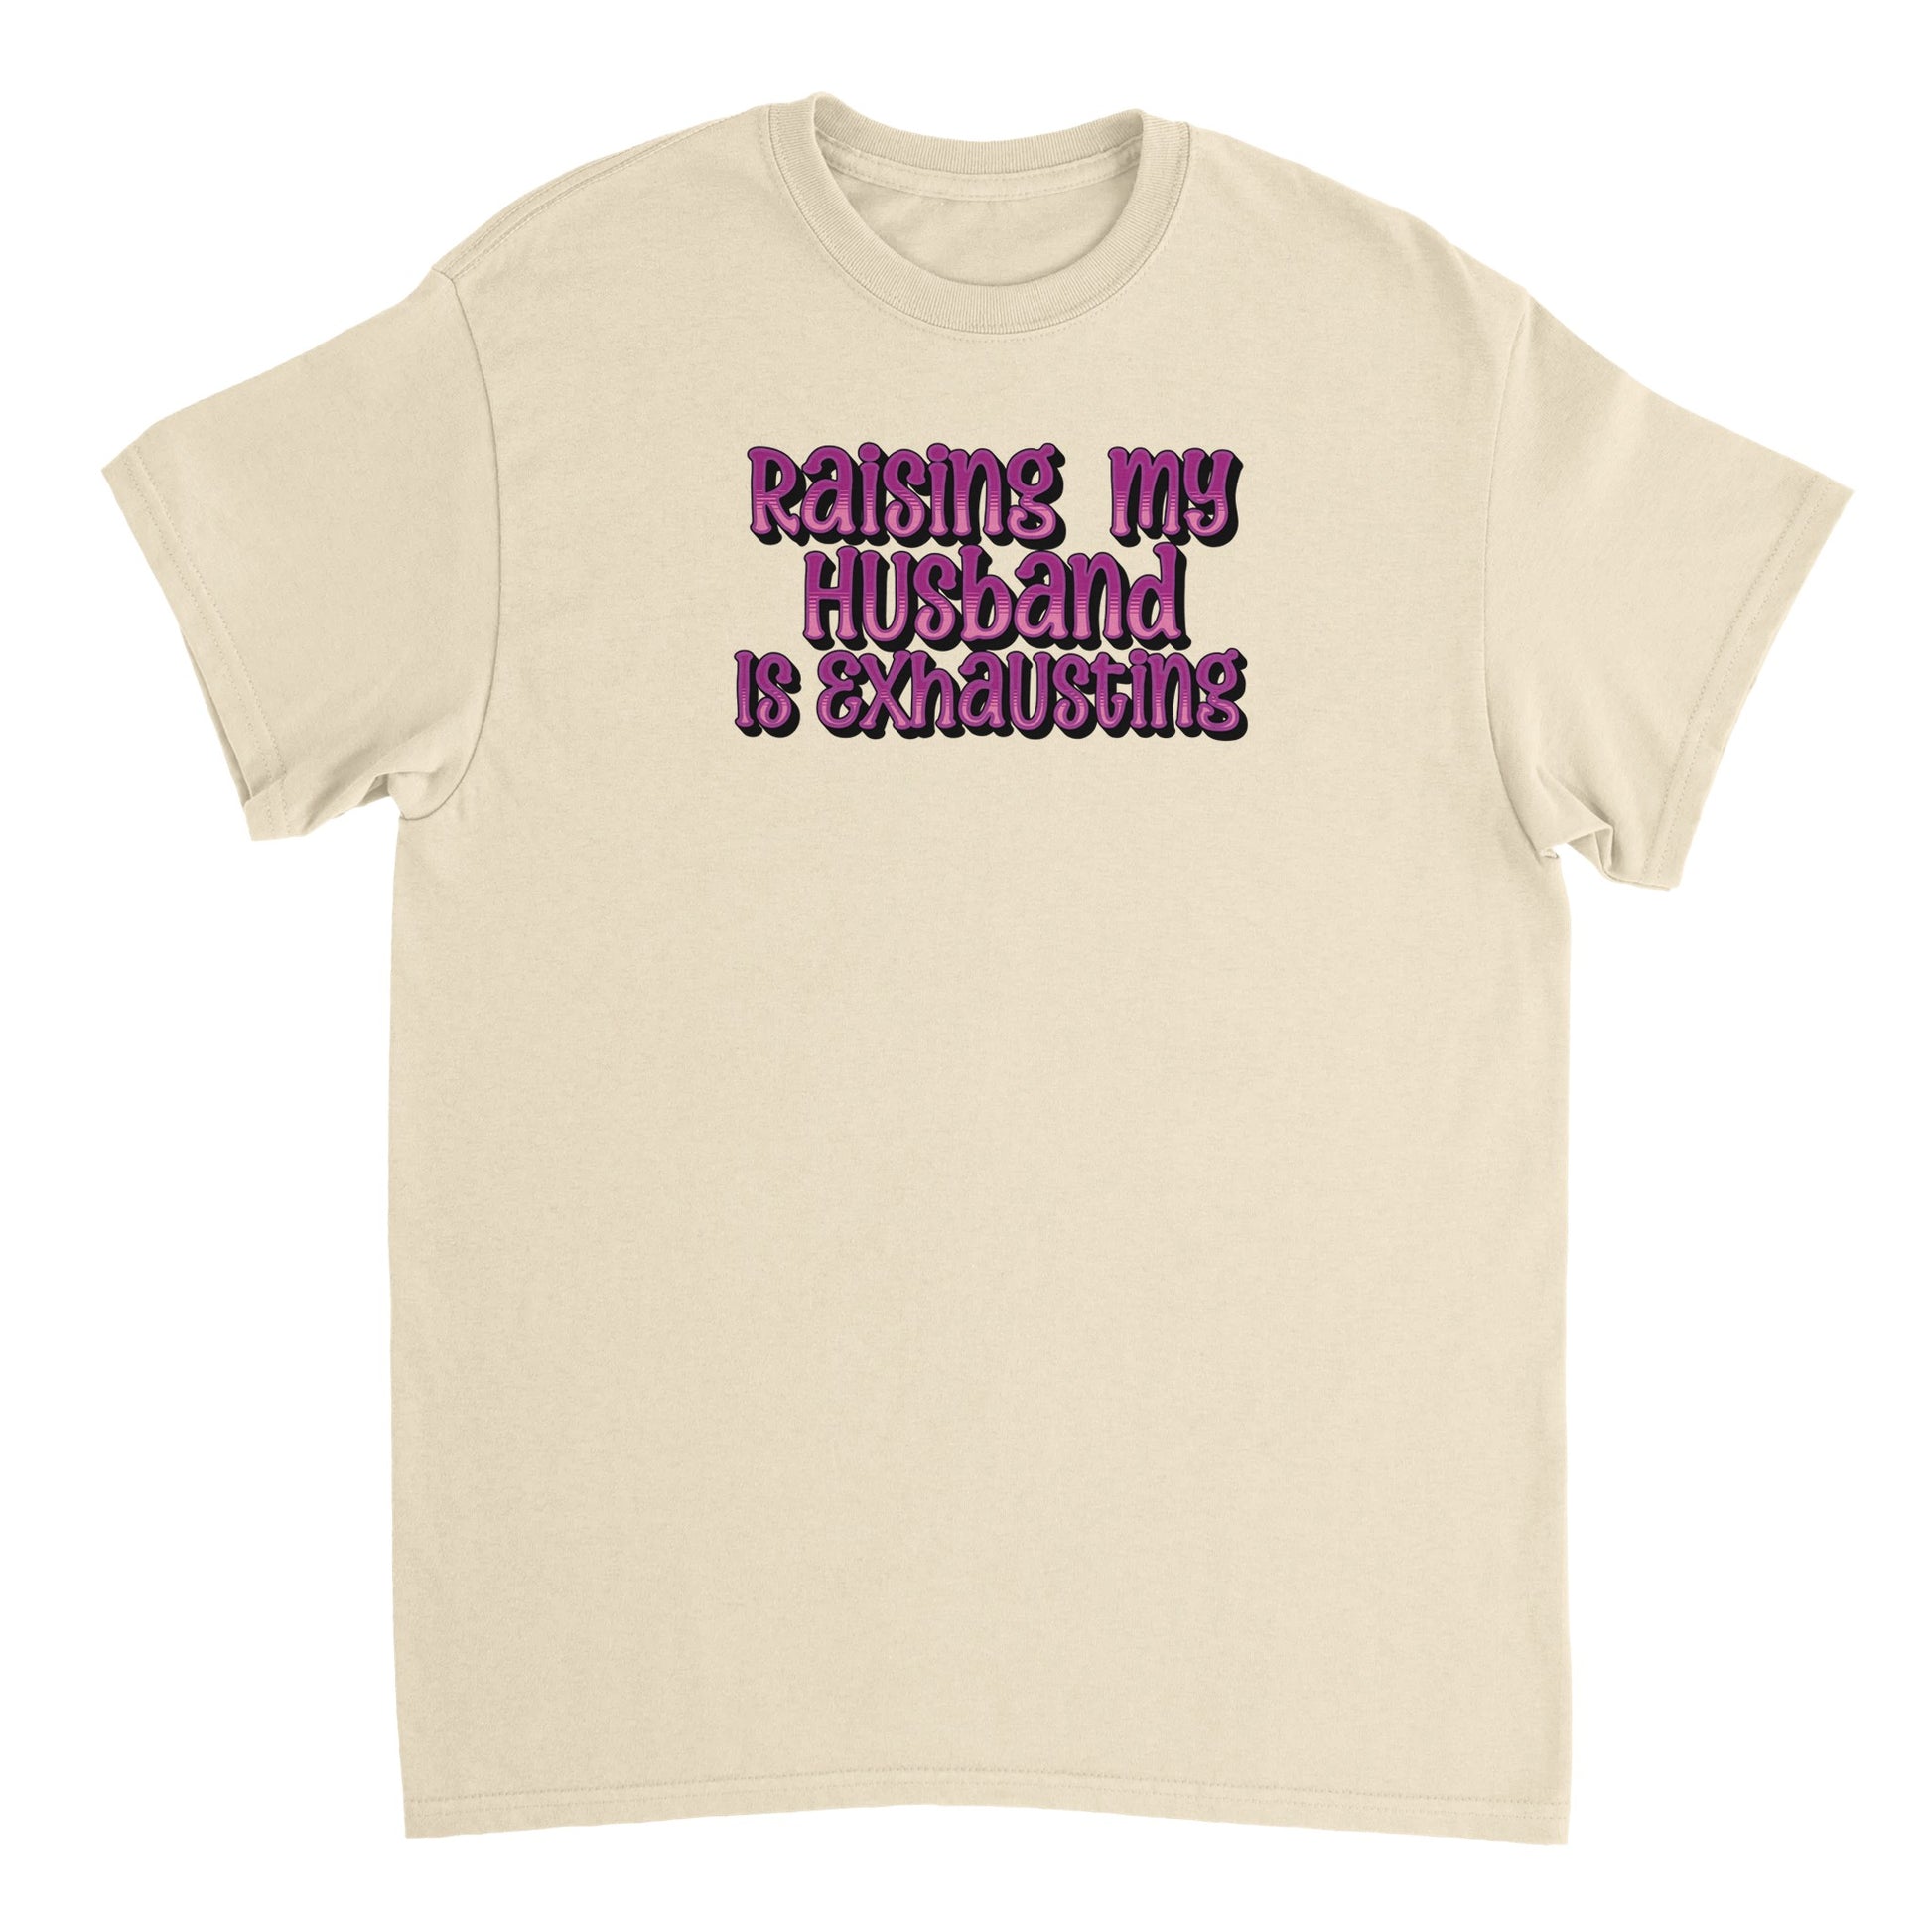 Raising My Husband is Exhausting T-shirt - Mister Snarky's